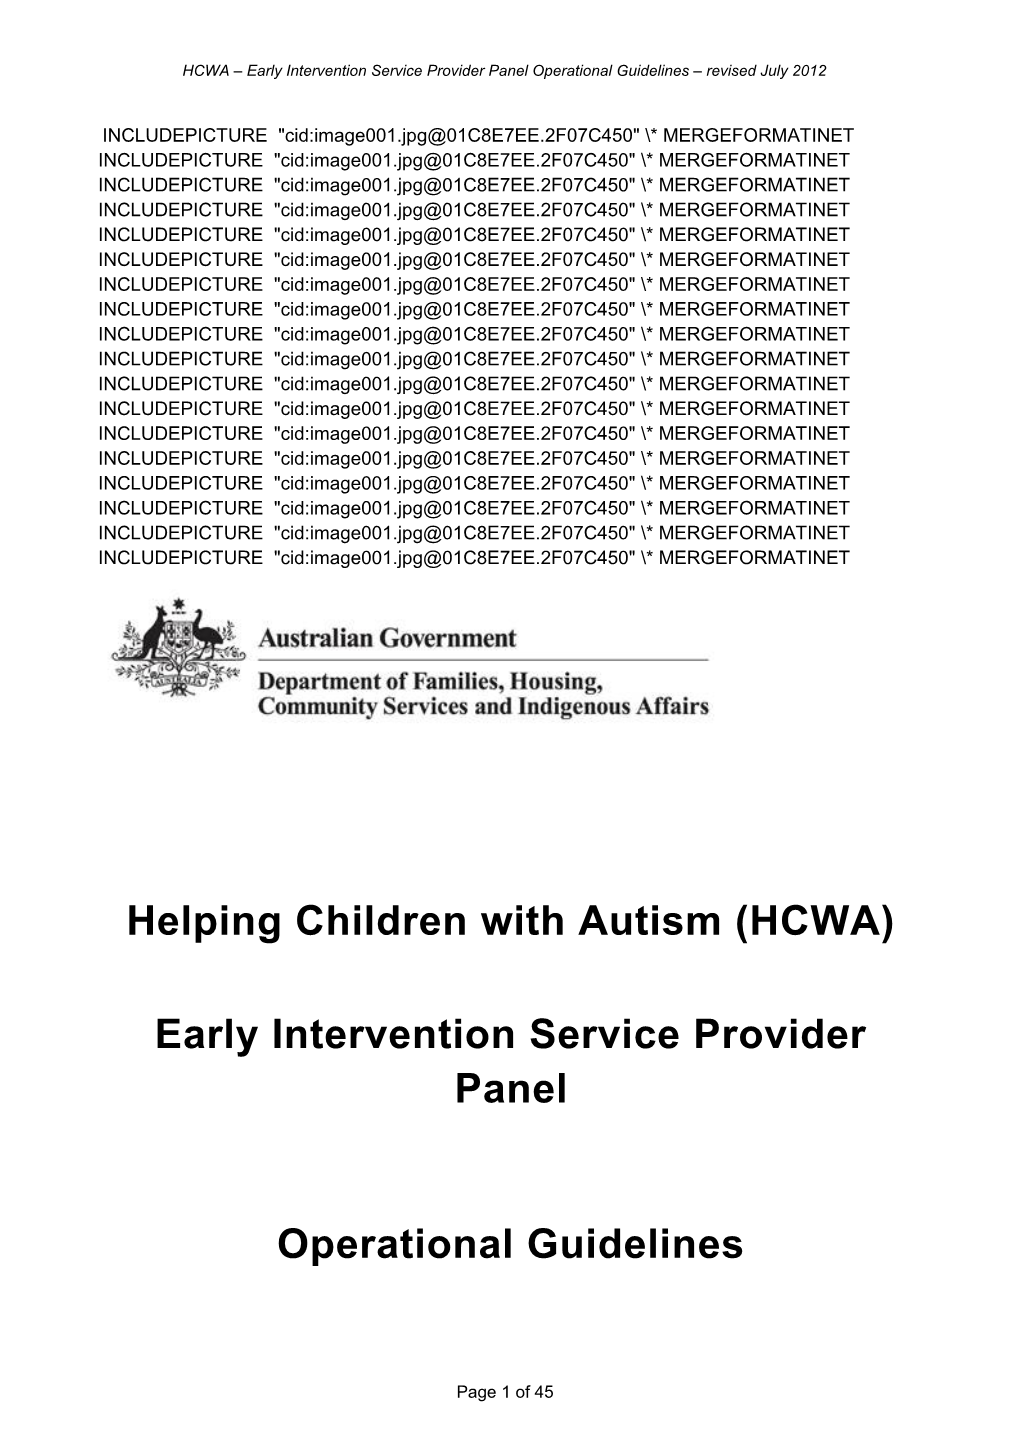 Helping Children with Autism (HCWA)